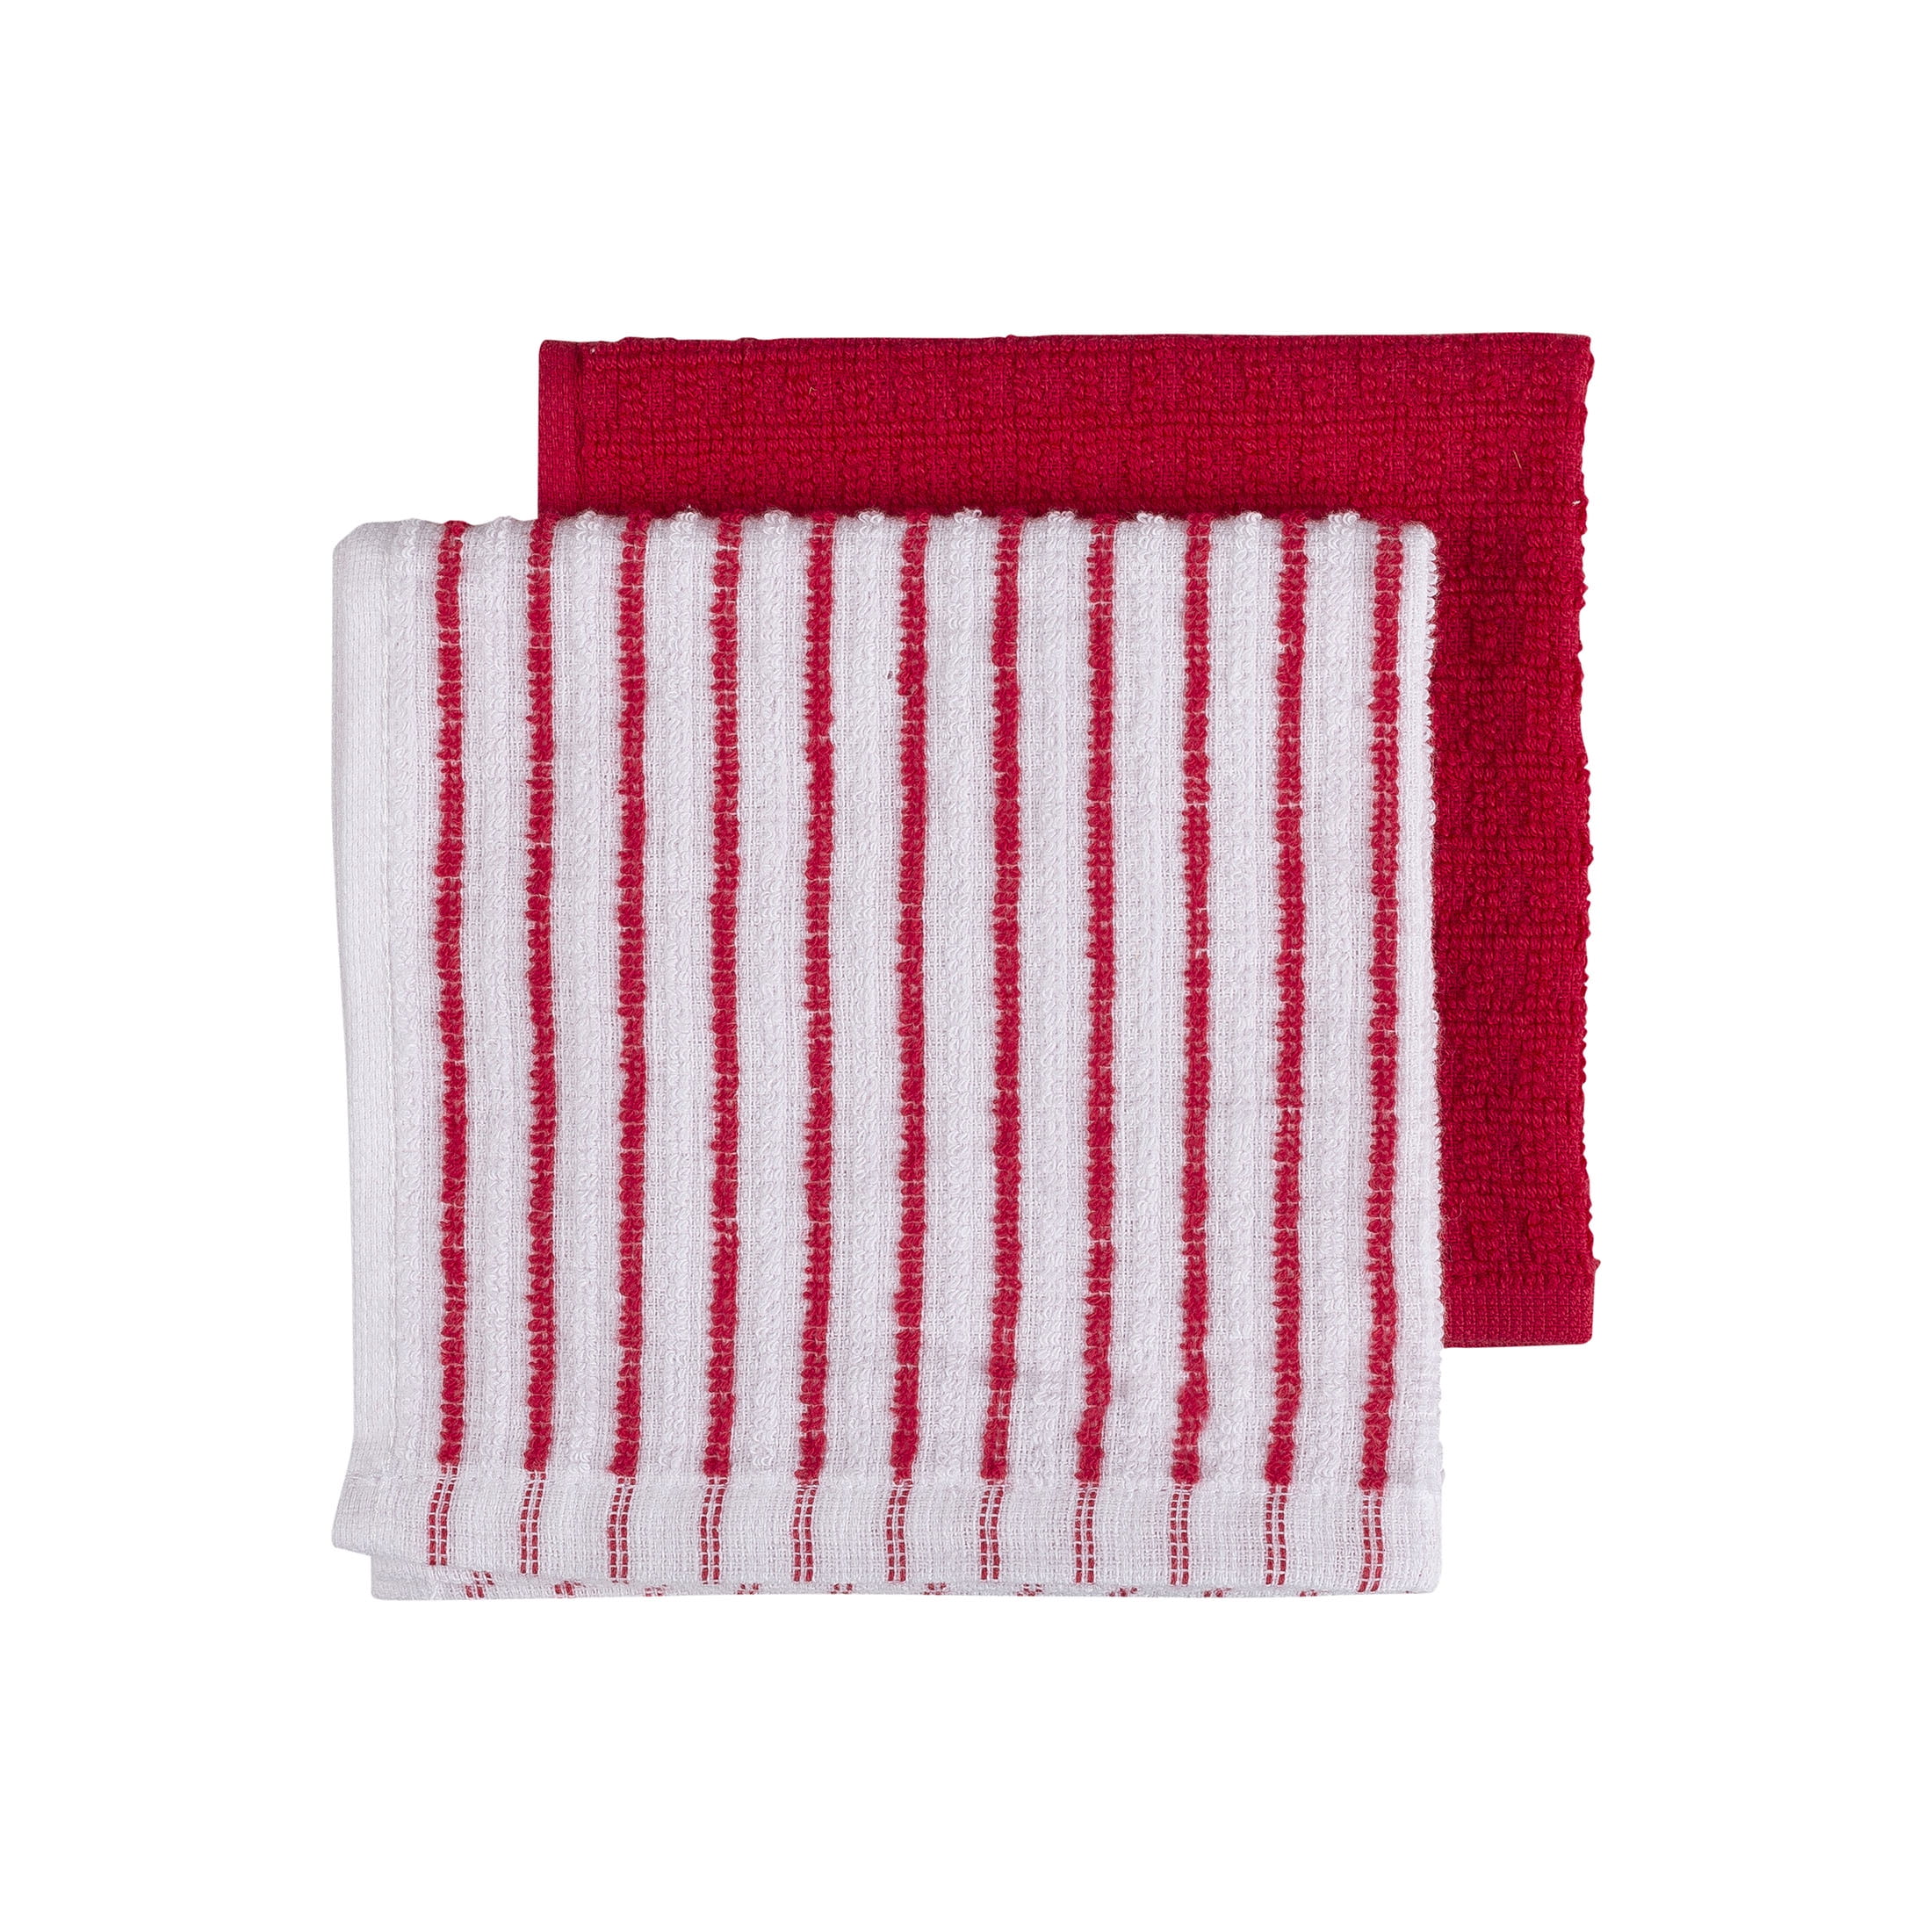 Dish Cloth Red and Black 2pc set –